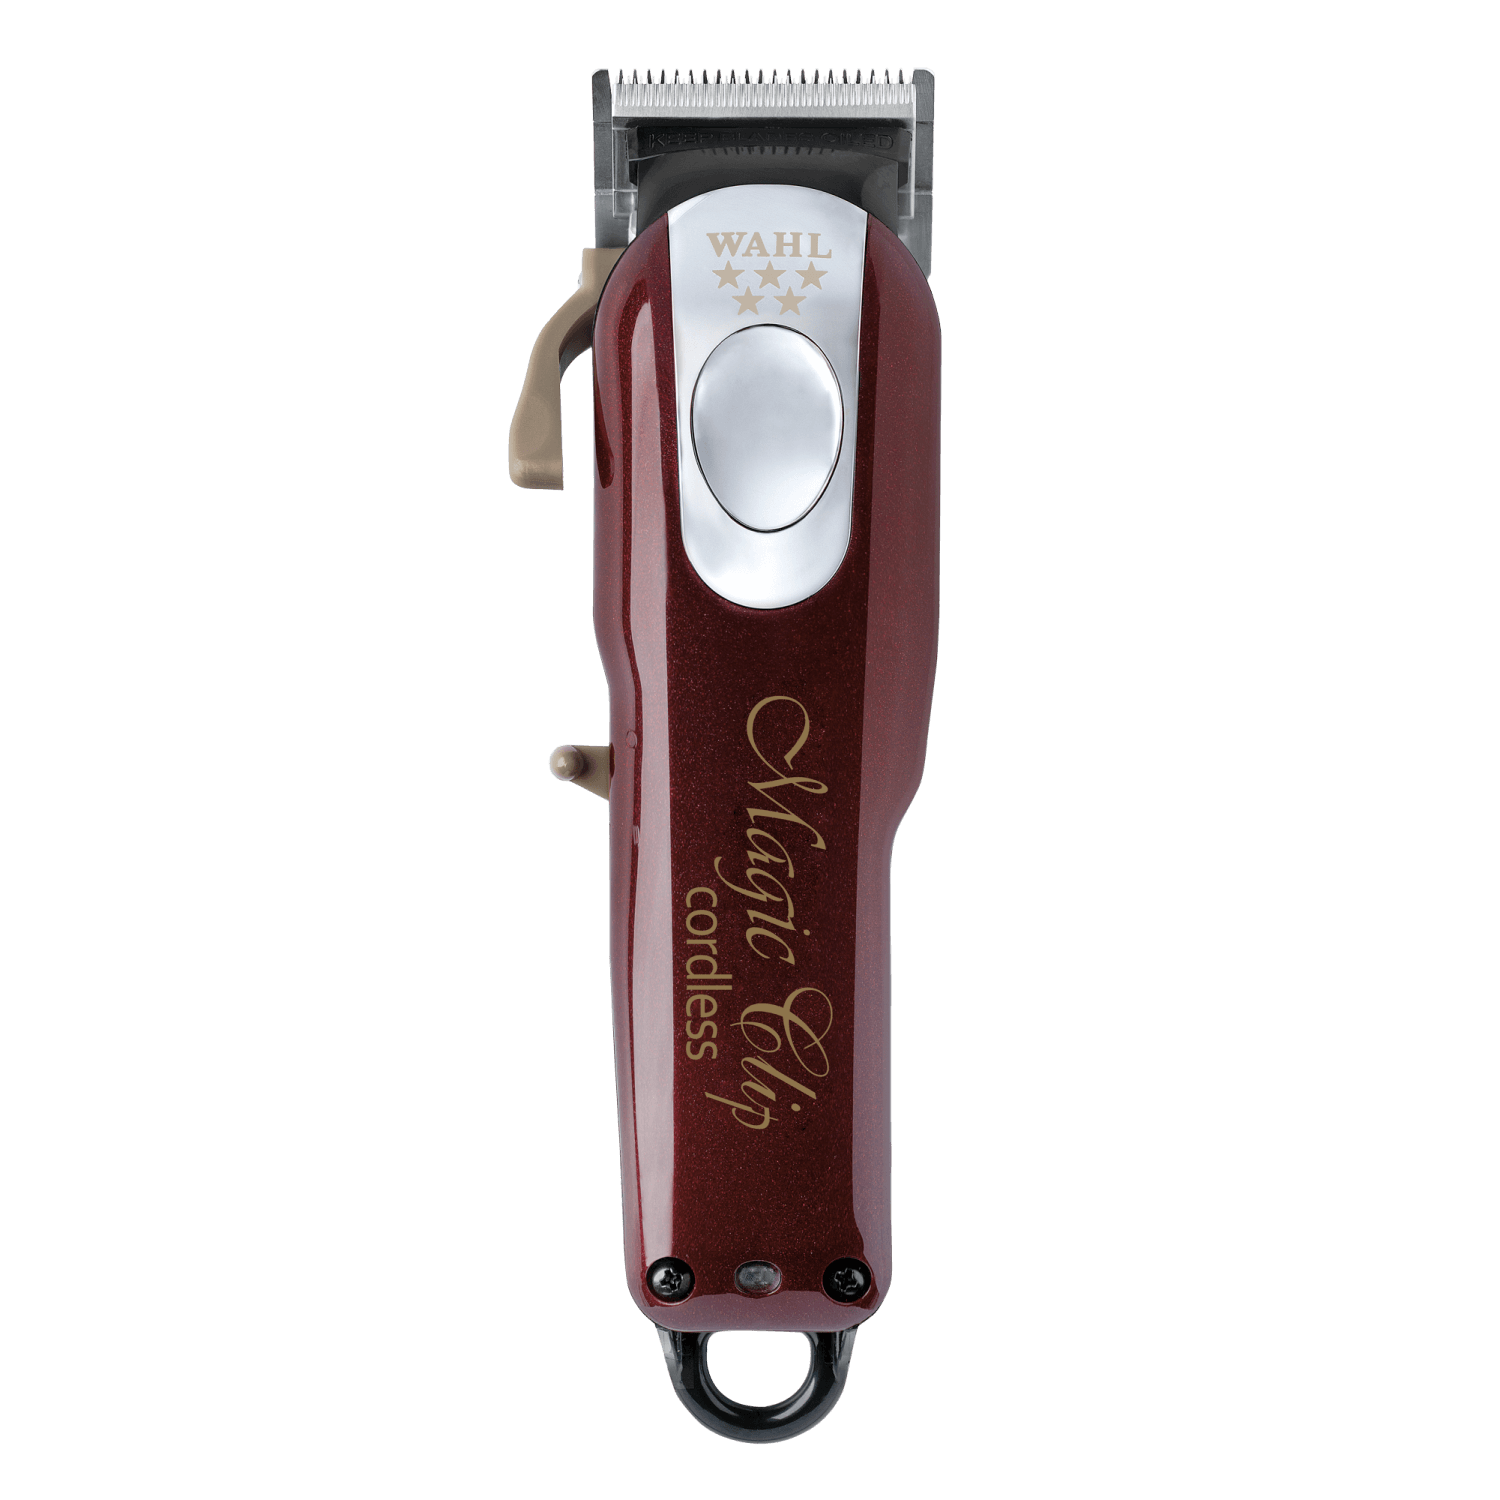 Wahl Cordless Magic Clipper | Hair Clippers & Trimmers ...